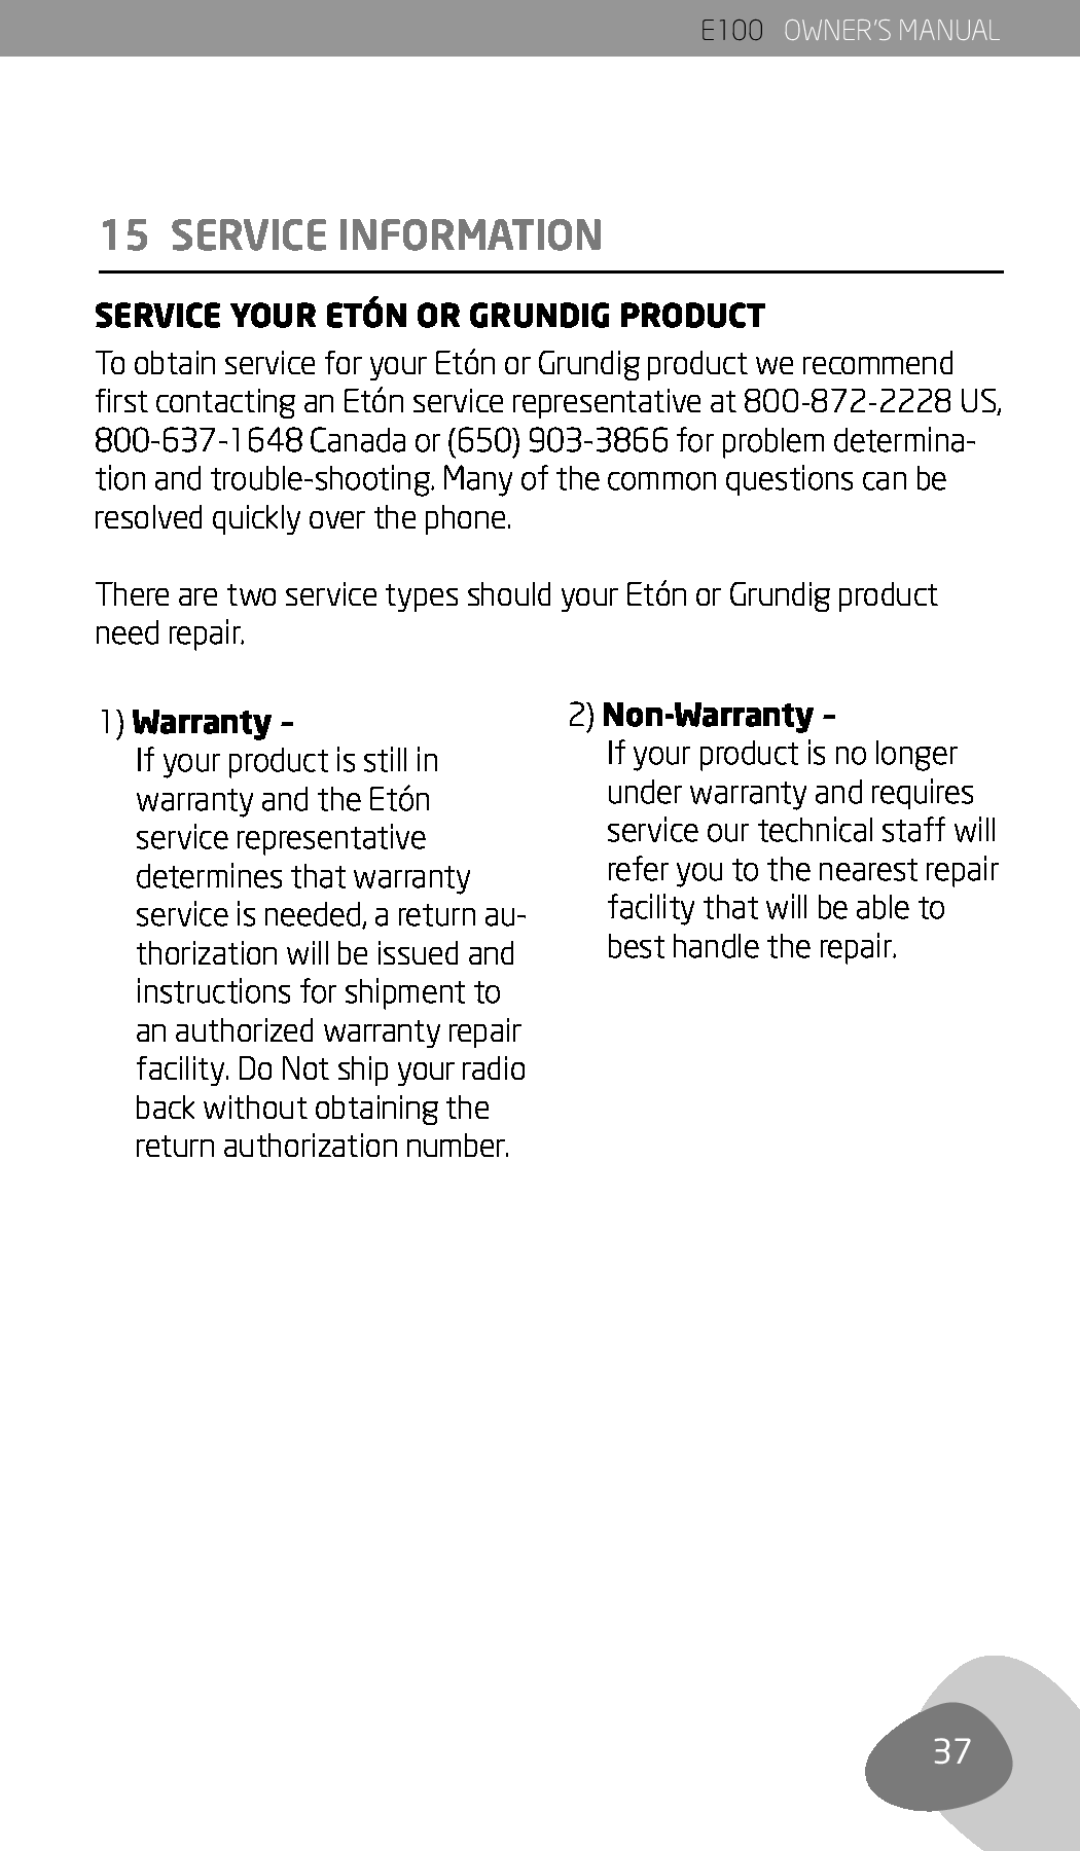 Eton E100 owner manual Service Information, Service Your Etón Or Grundig Product, 1Warranty, 2Non-Warranty 